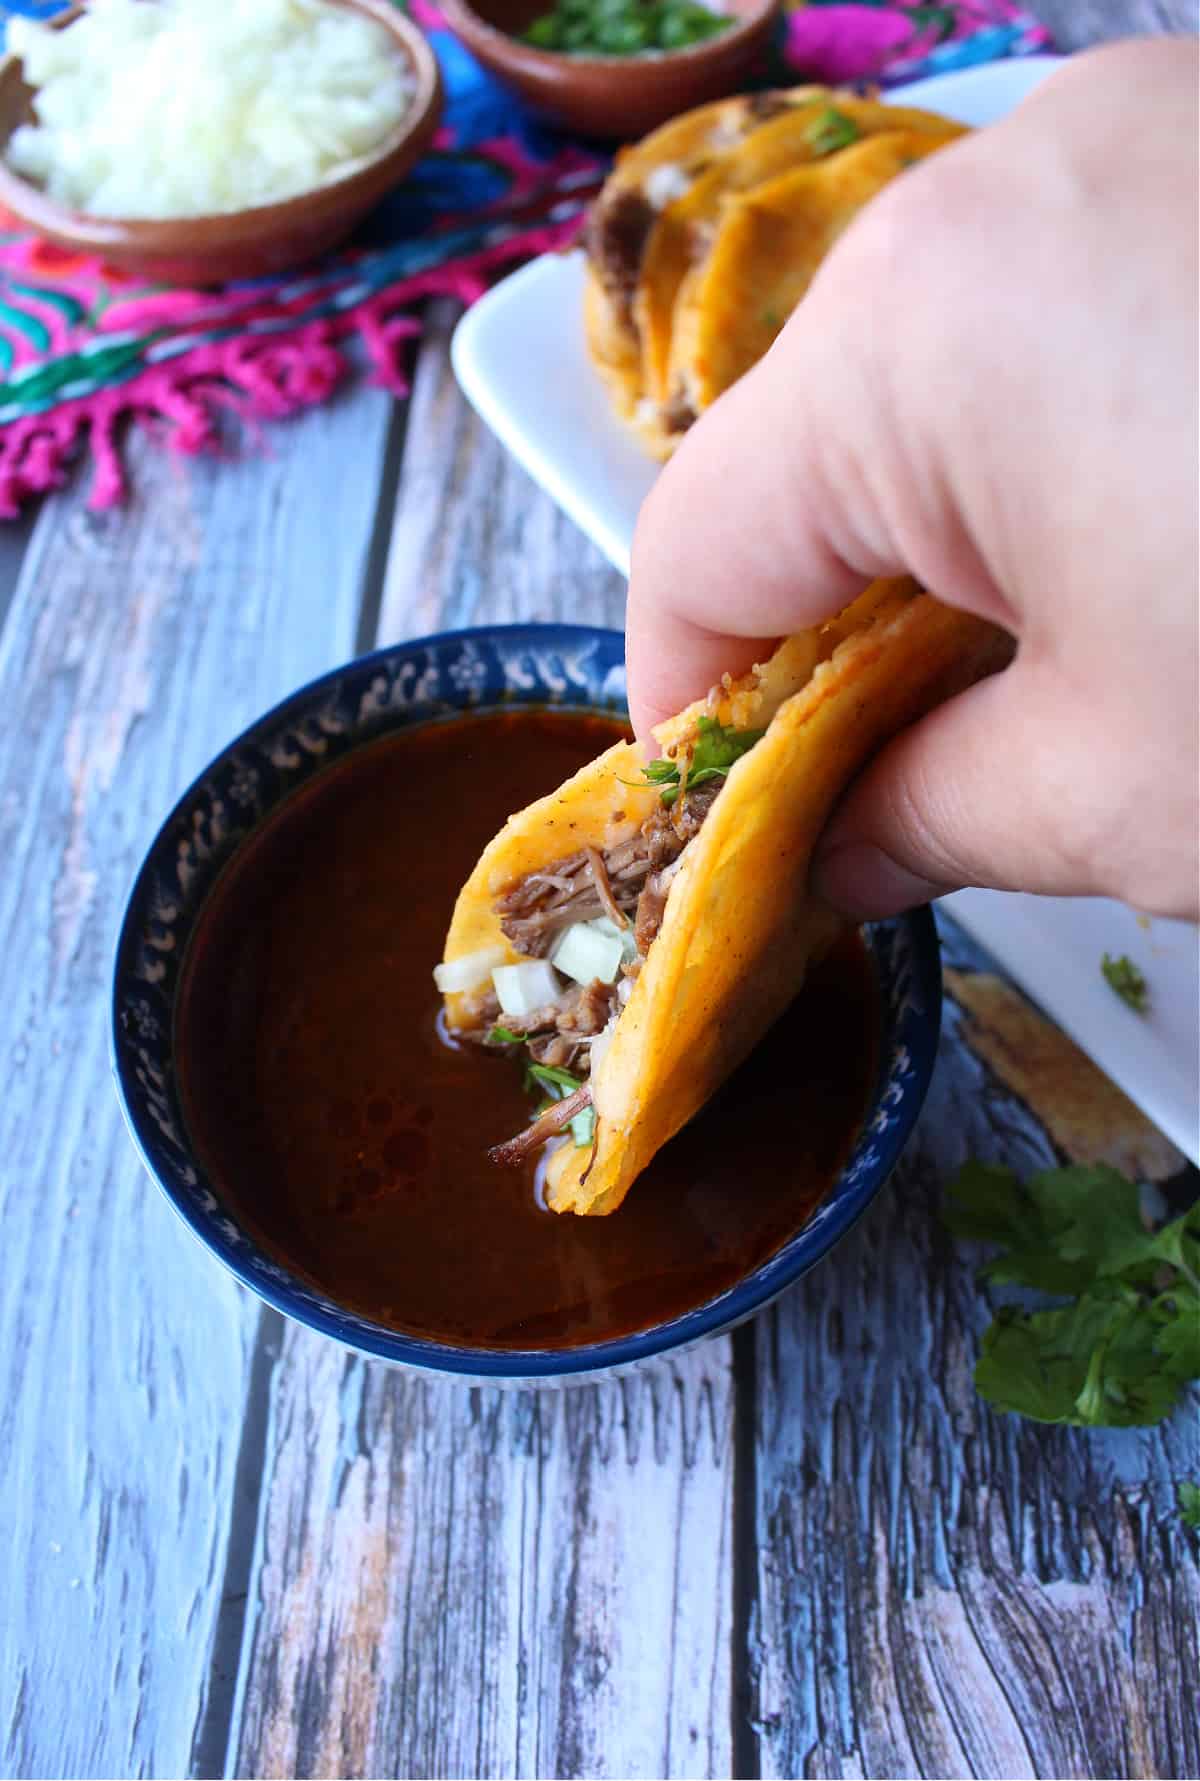 A hand dipping a birria taco into the consomme.